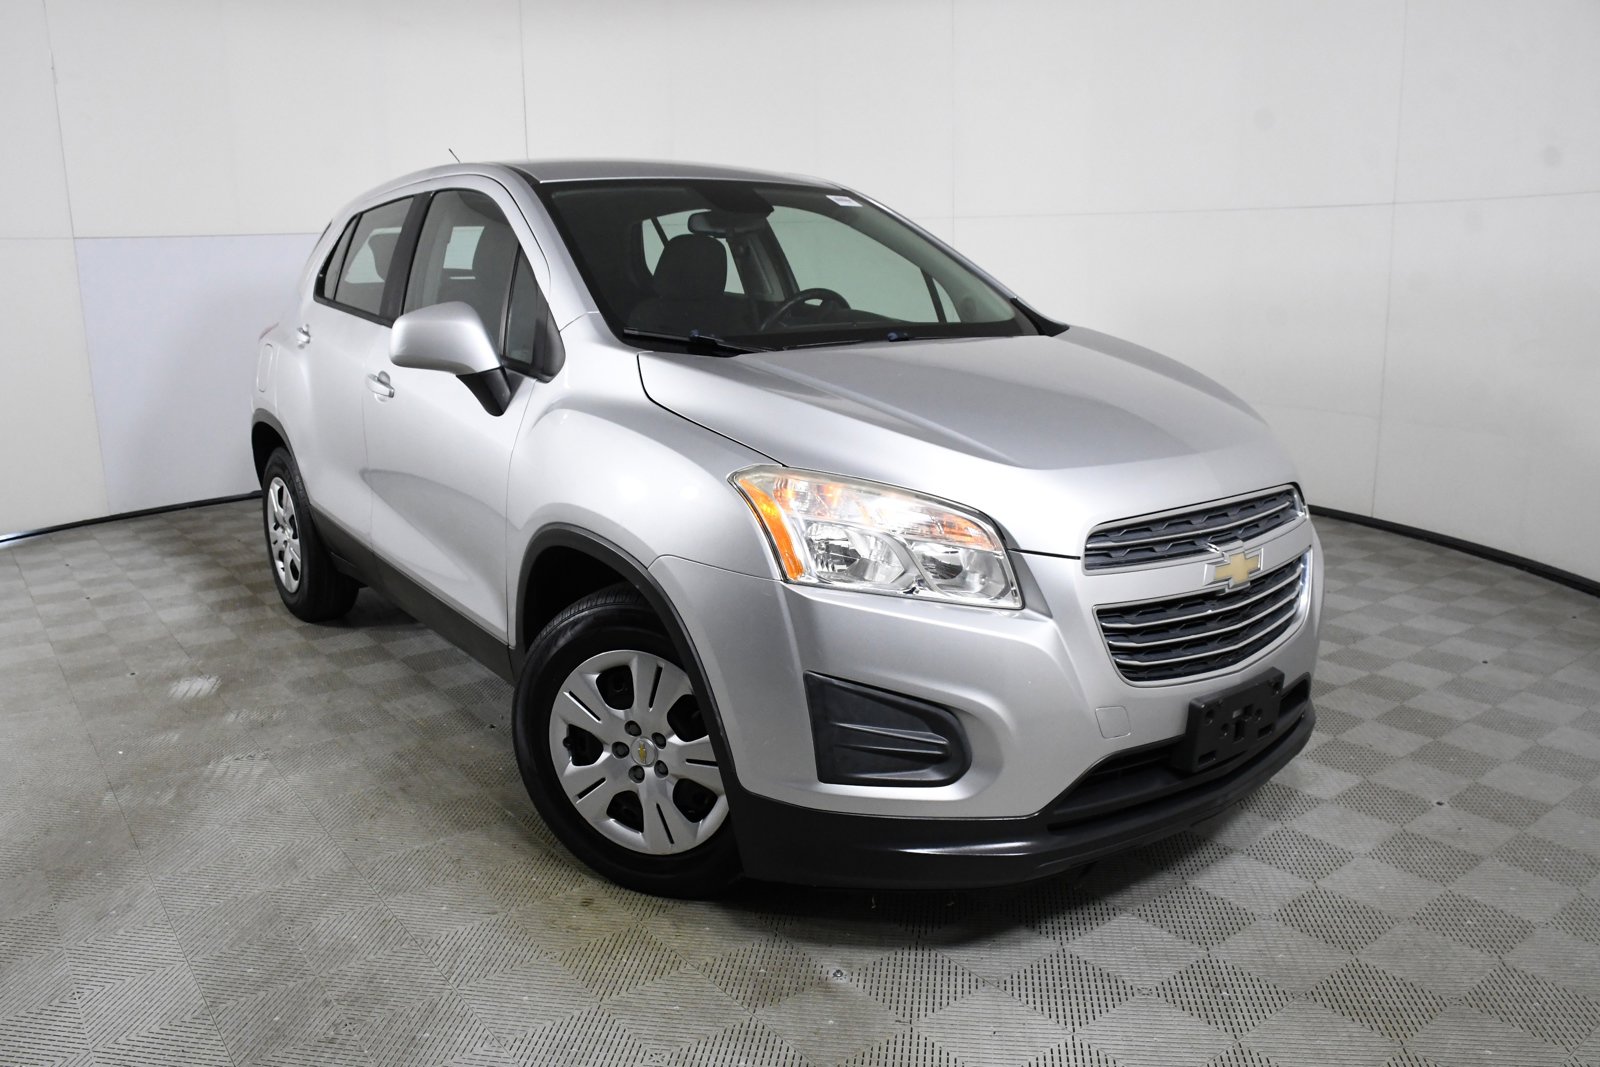 Pre-Owned 2016 Chevrolet Trax LS Sport Utility in Palmetto Bay #L279917 |  HGreg Nissan Kendall